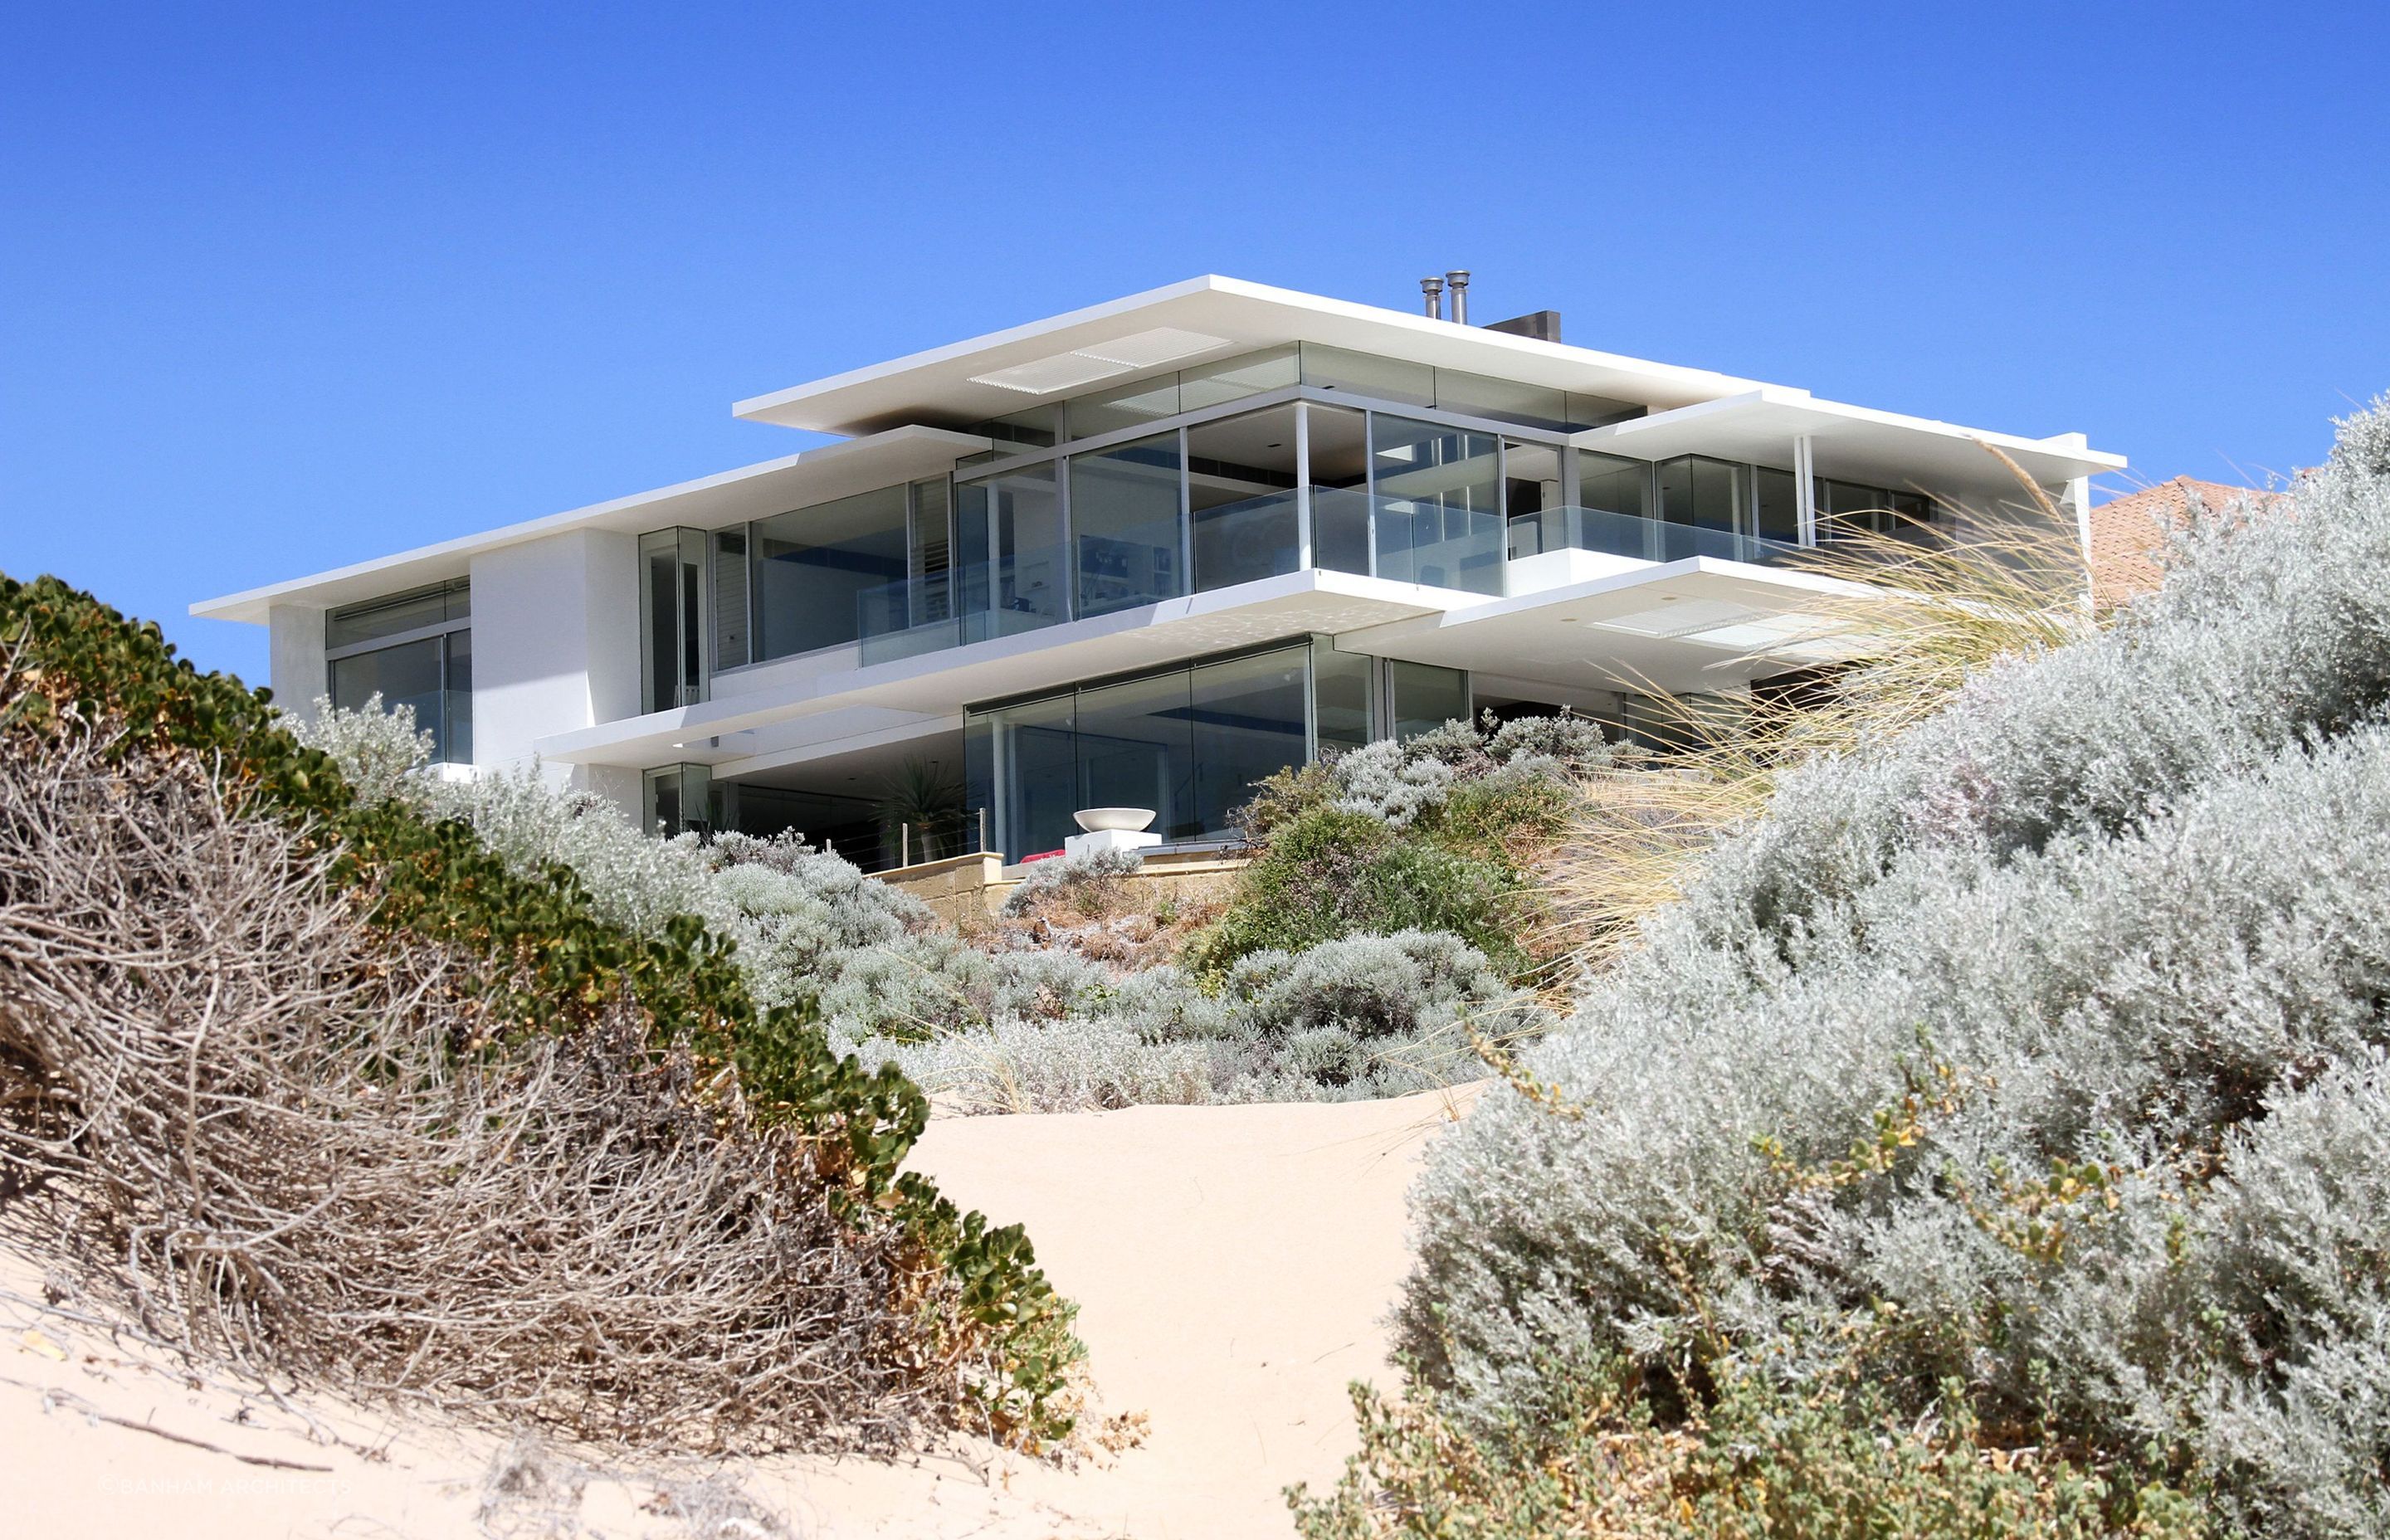 The Avalon Bay Beach House is perfectly nestled amidst the lush and untamed native beach vegetation. Photography: Annetta Ashman.